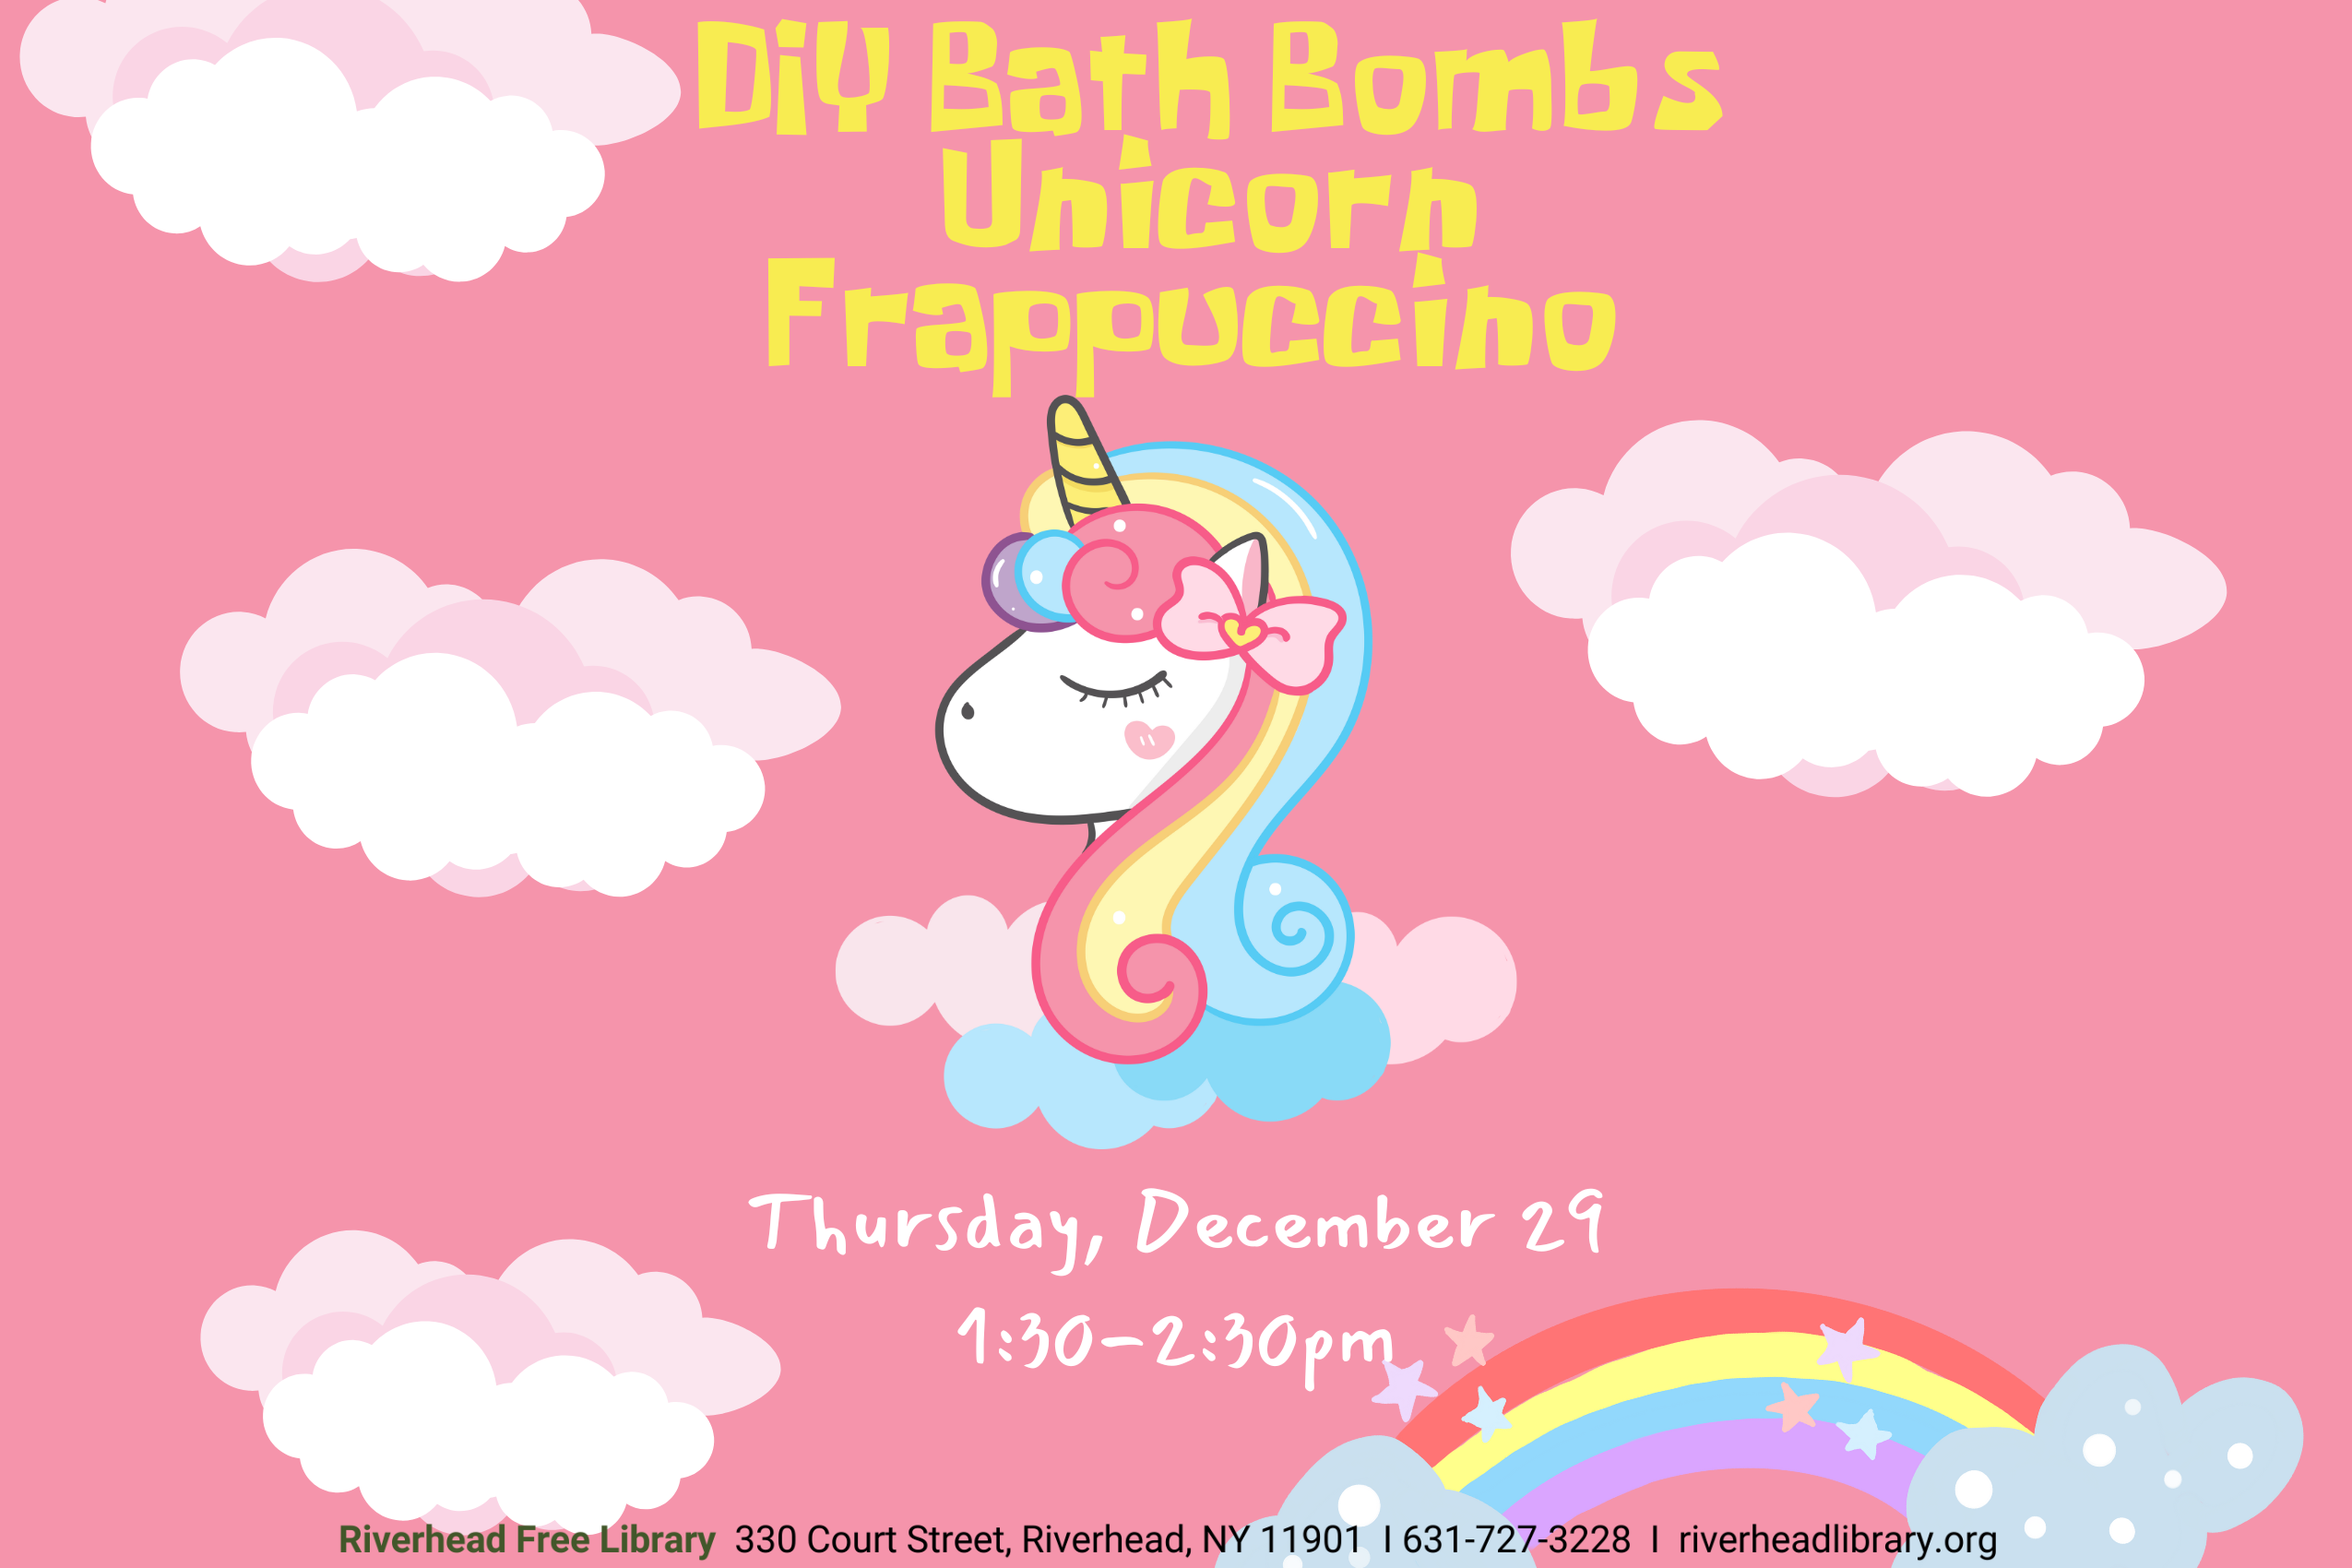 Program flyer with the following text, "DIY Bath Bombs. Unicorn Frappuccino. Thursday, December 29. 1:30-2:30pm."